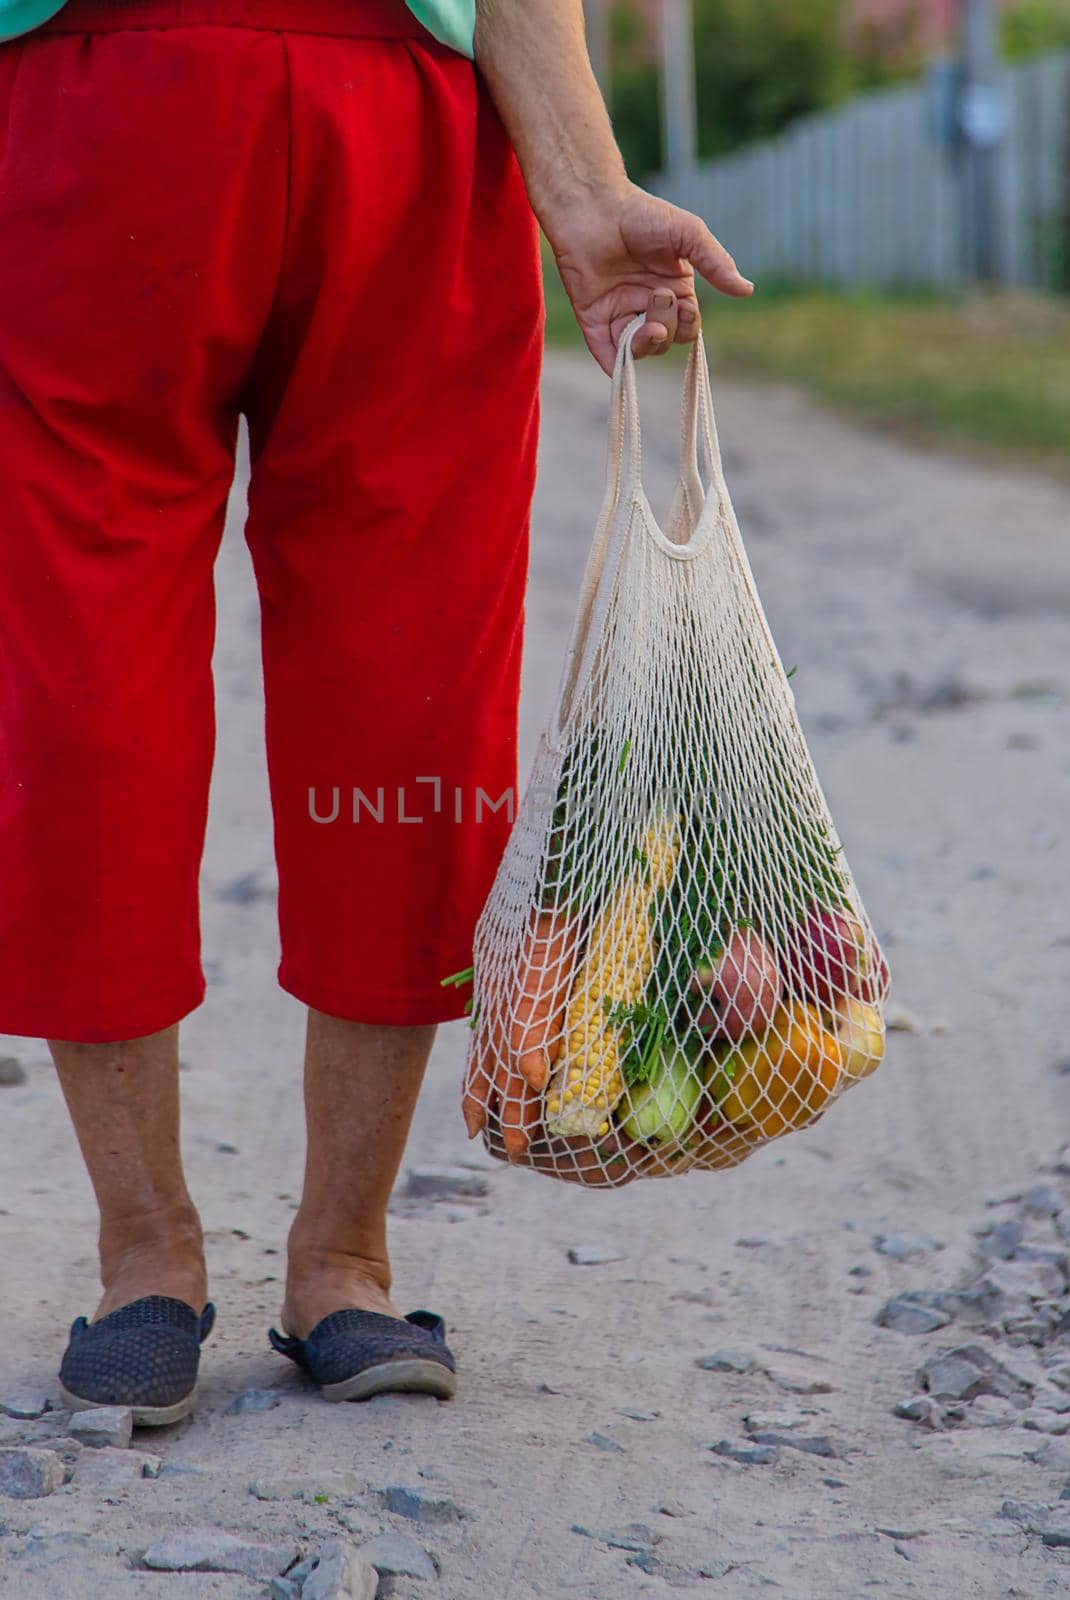 Grandmother carries vegetables in a shopping bag. Selective focus. by yanadjana